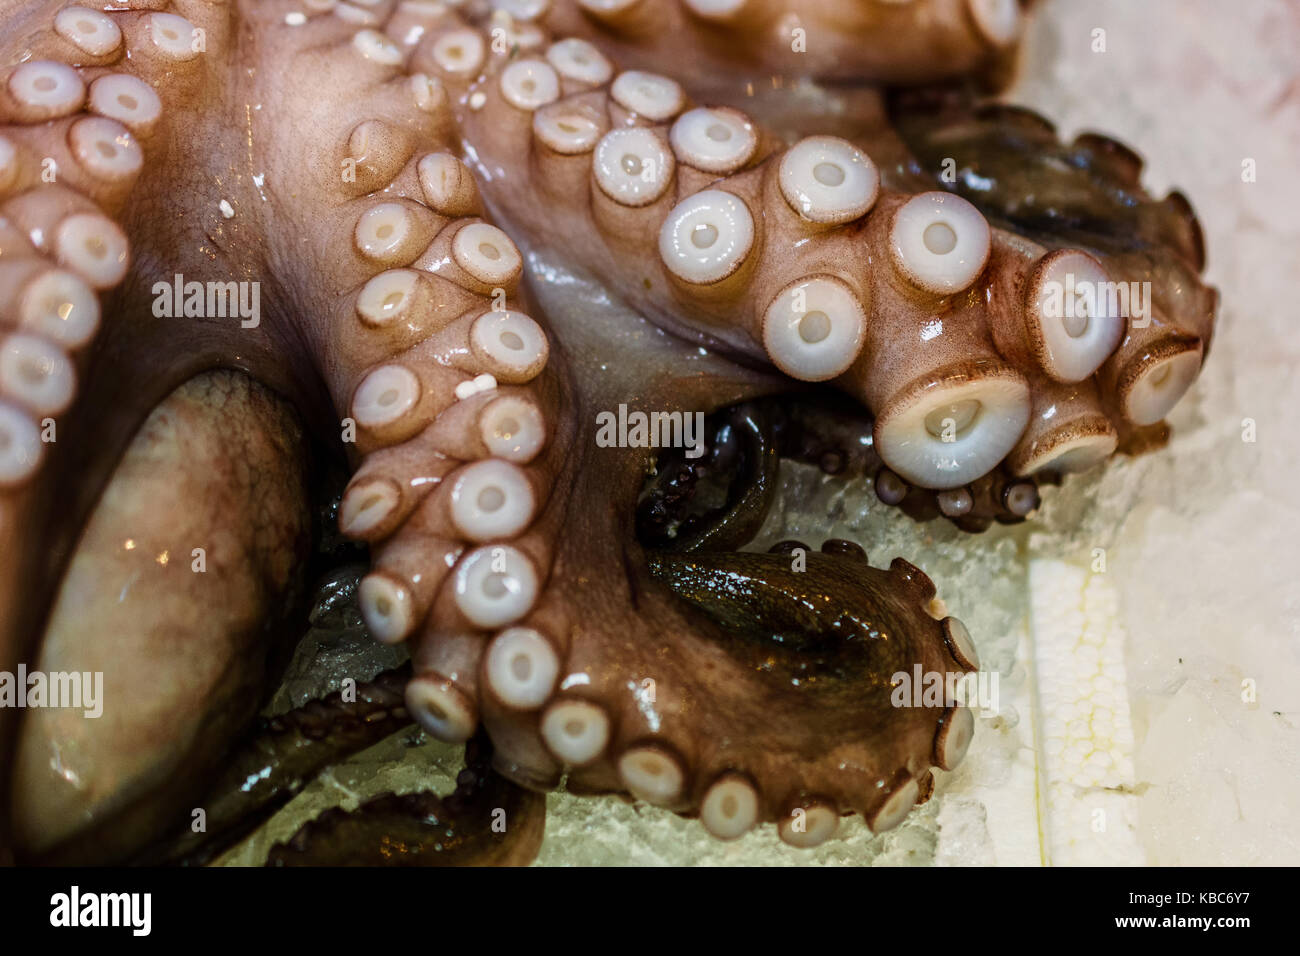 Close-Up Of Fresh Octopus With Tentacles On Ice For Sale In Greek Fish Market Stock Photo